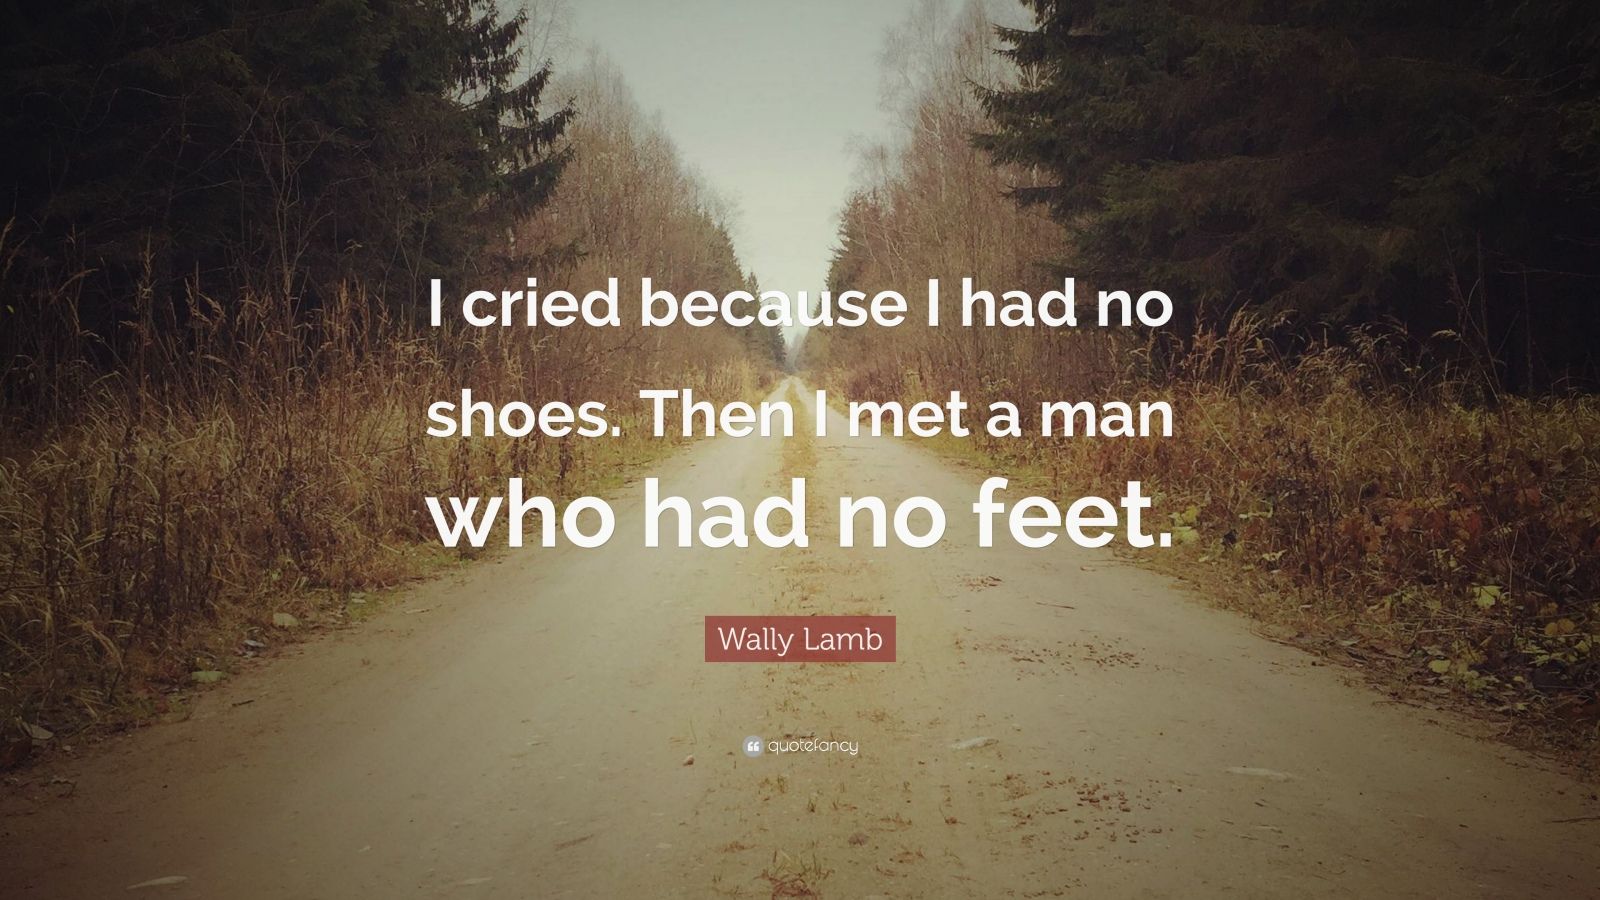 Wally Lamb Quote: “I cried because I had no shoes. Then I met a man who